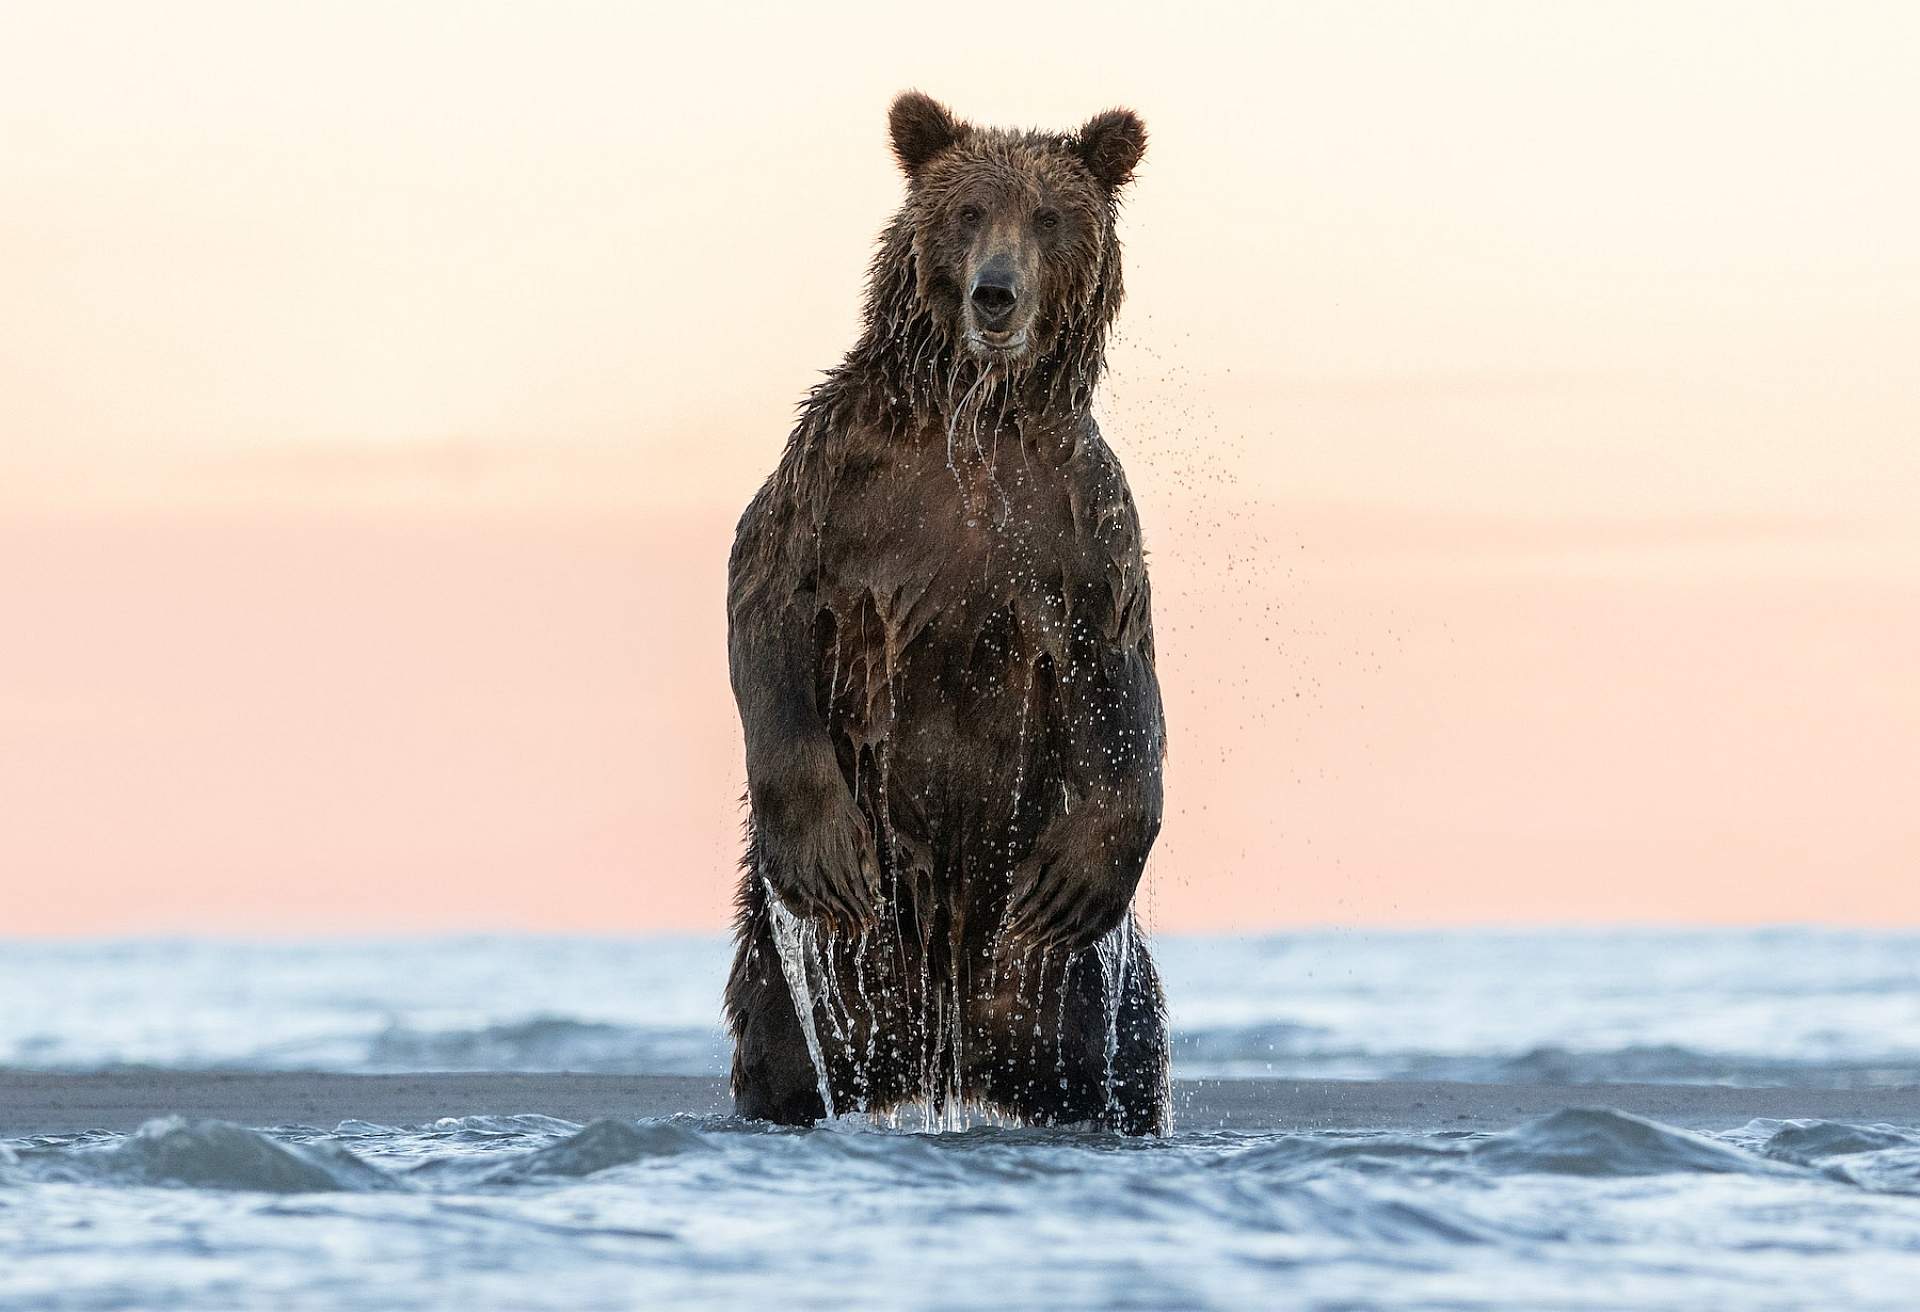 A brown bear emerges from the water to search where a salmon had just escaped to